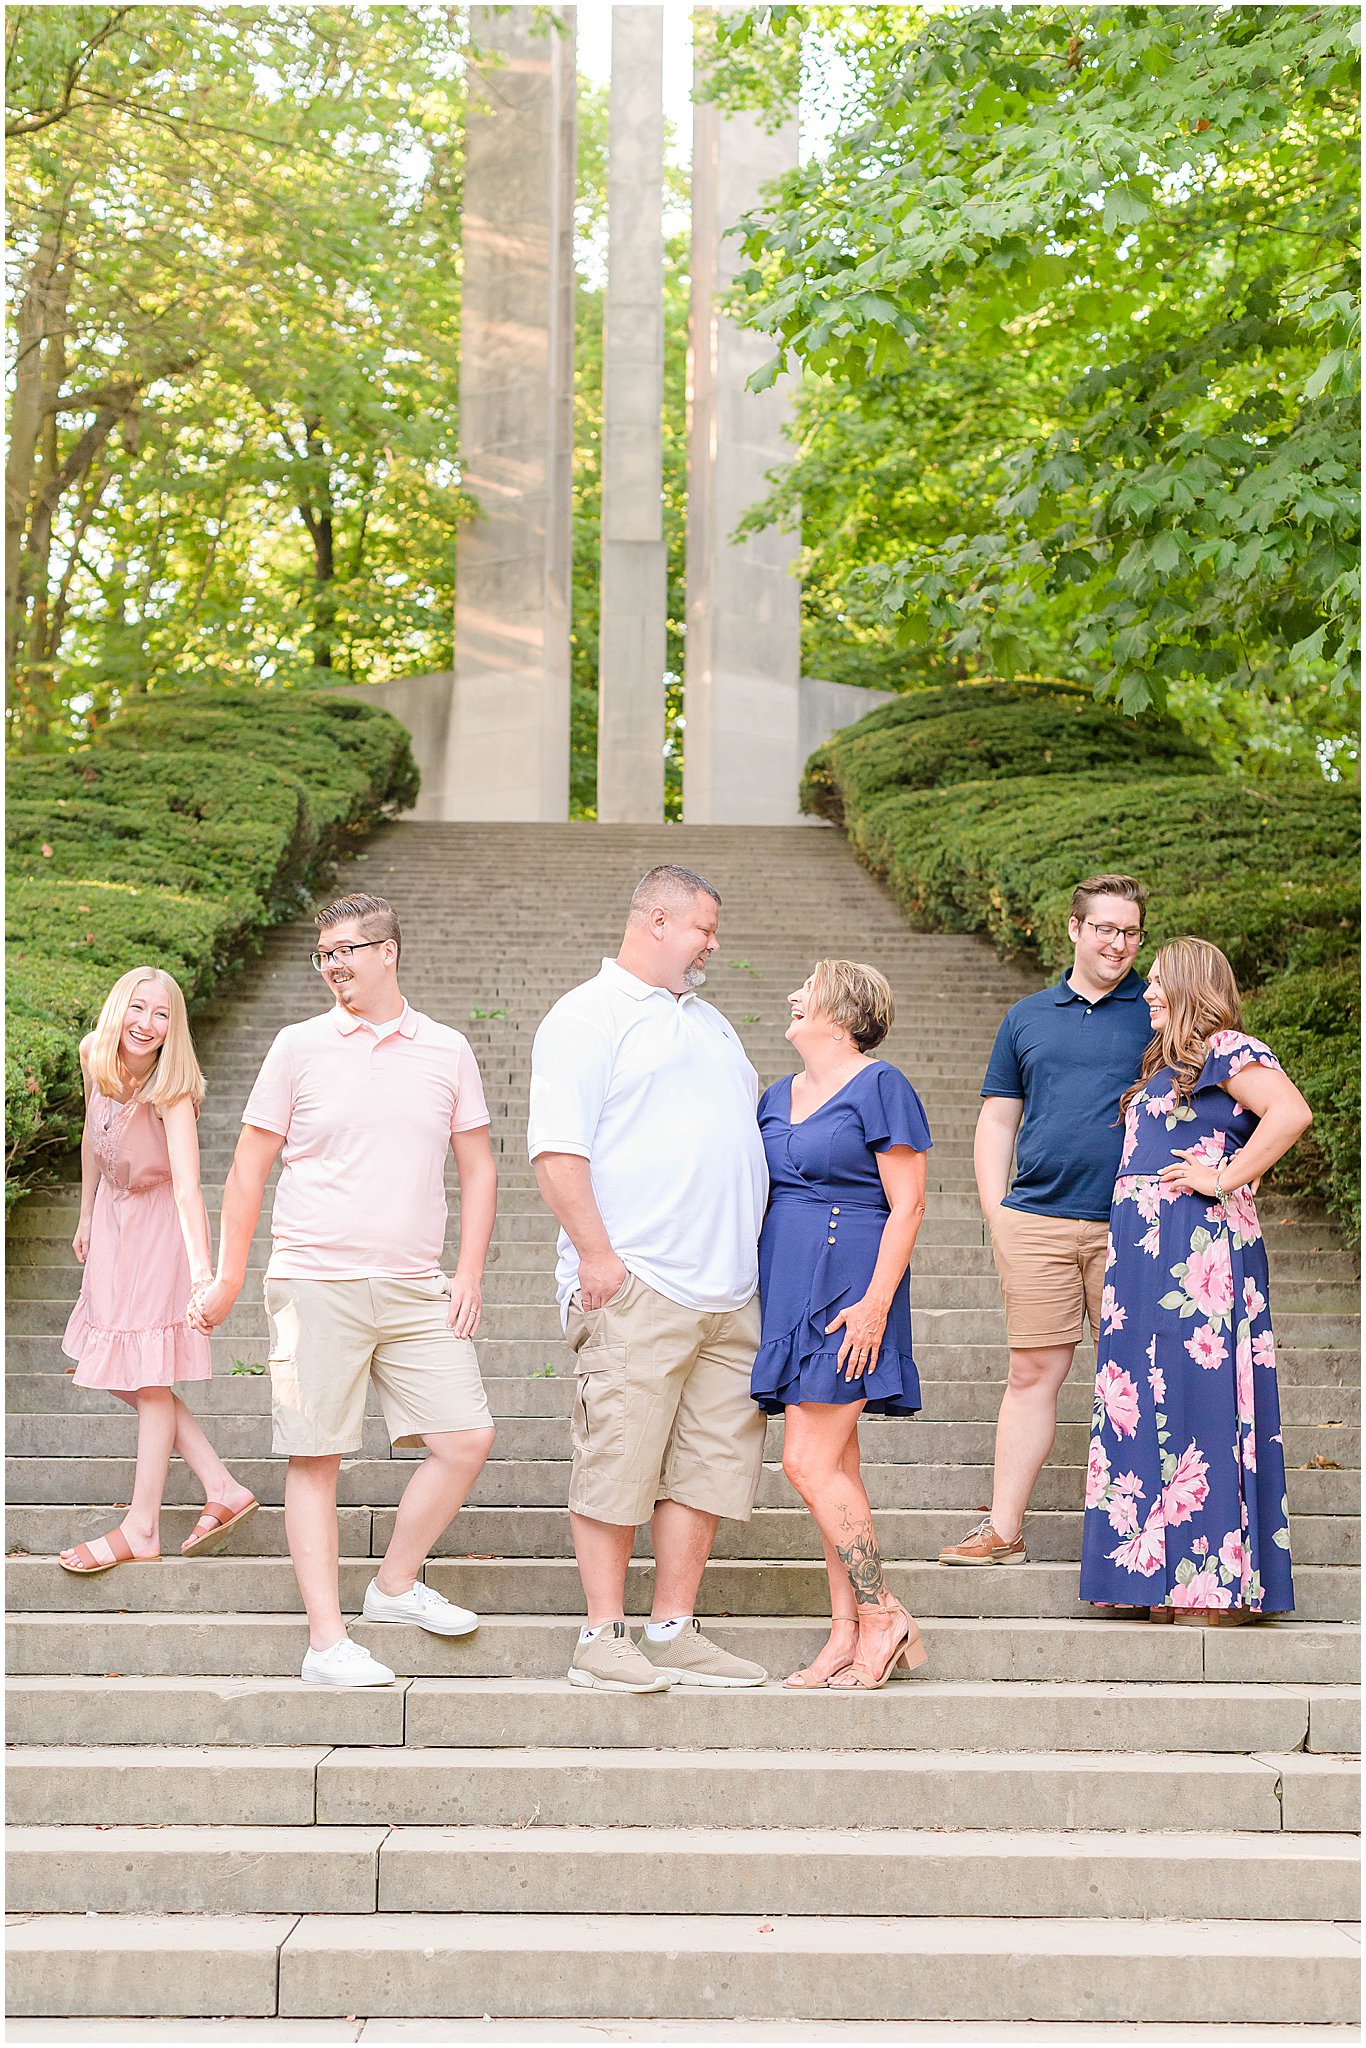 Family staggered in groups and laughing together Holcomb Gardens family session